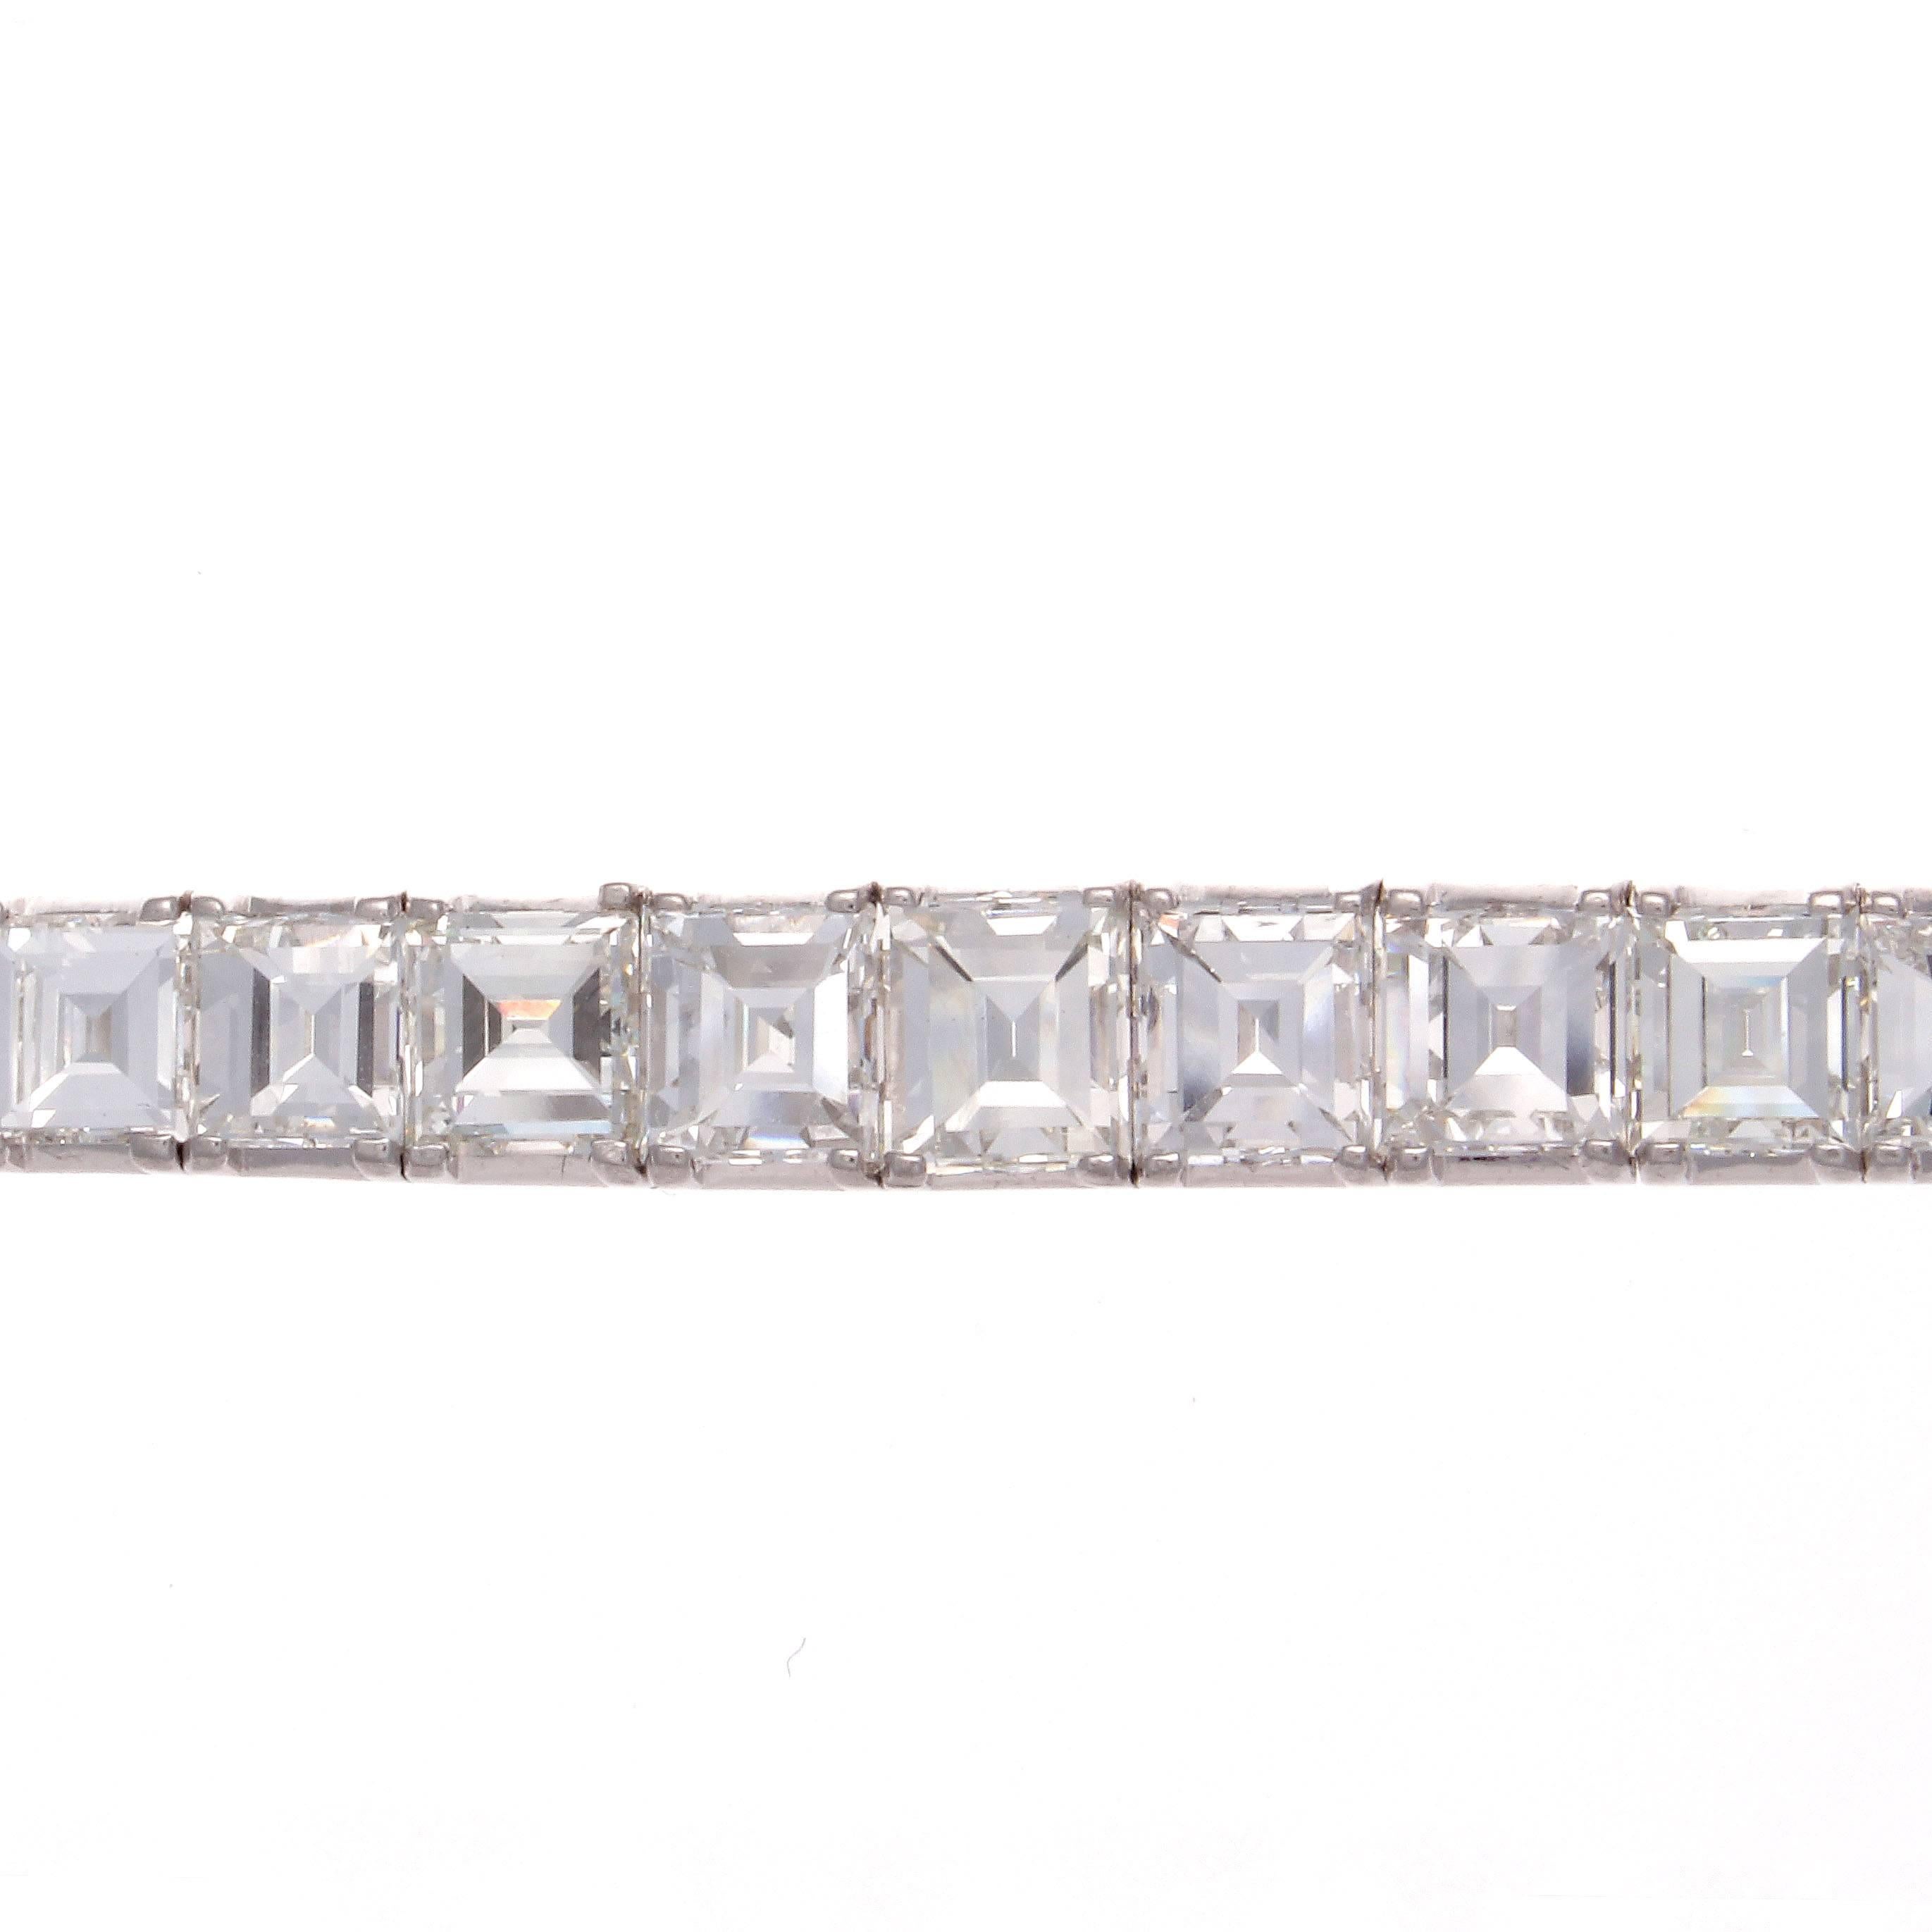 Timeless elegance radiates from this special one of a kind Art Deco diamond bracelet. Designed with 39 perfectly matching rectangular step cuts that are G,H in color VS+ in clarity and having a total approximate carat weight of 28 carats. The 9